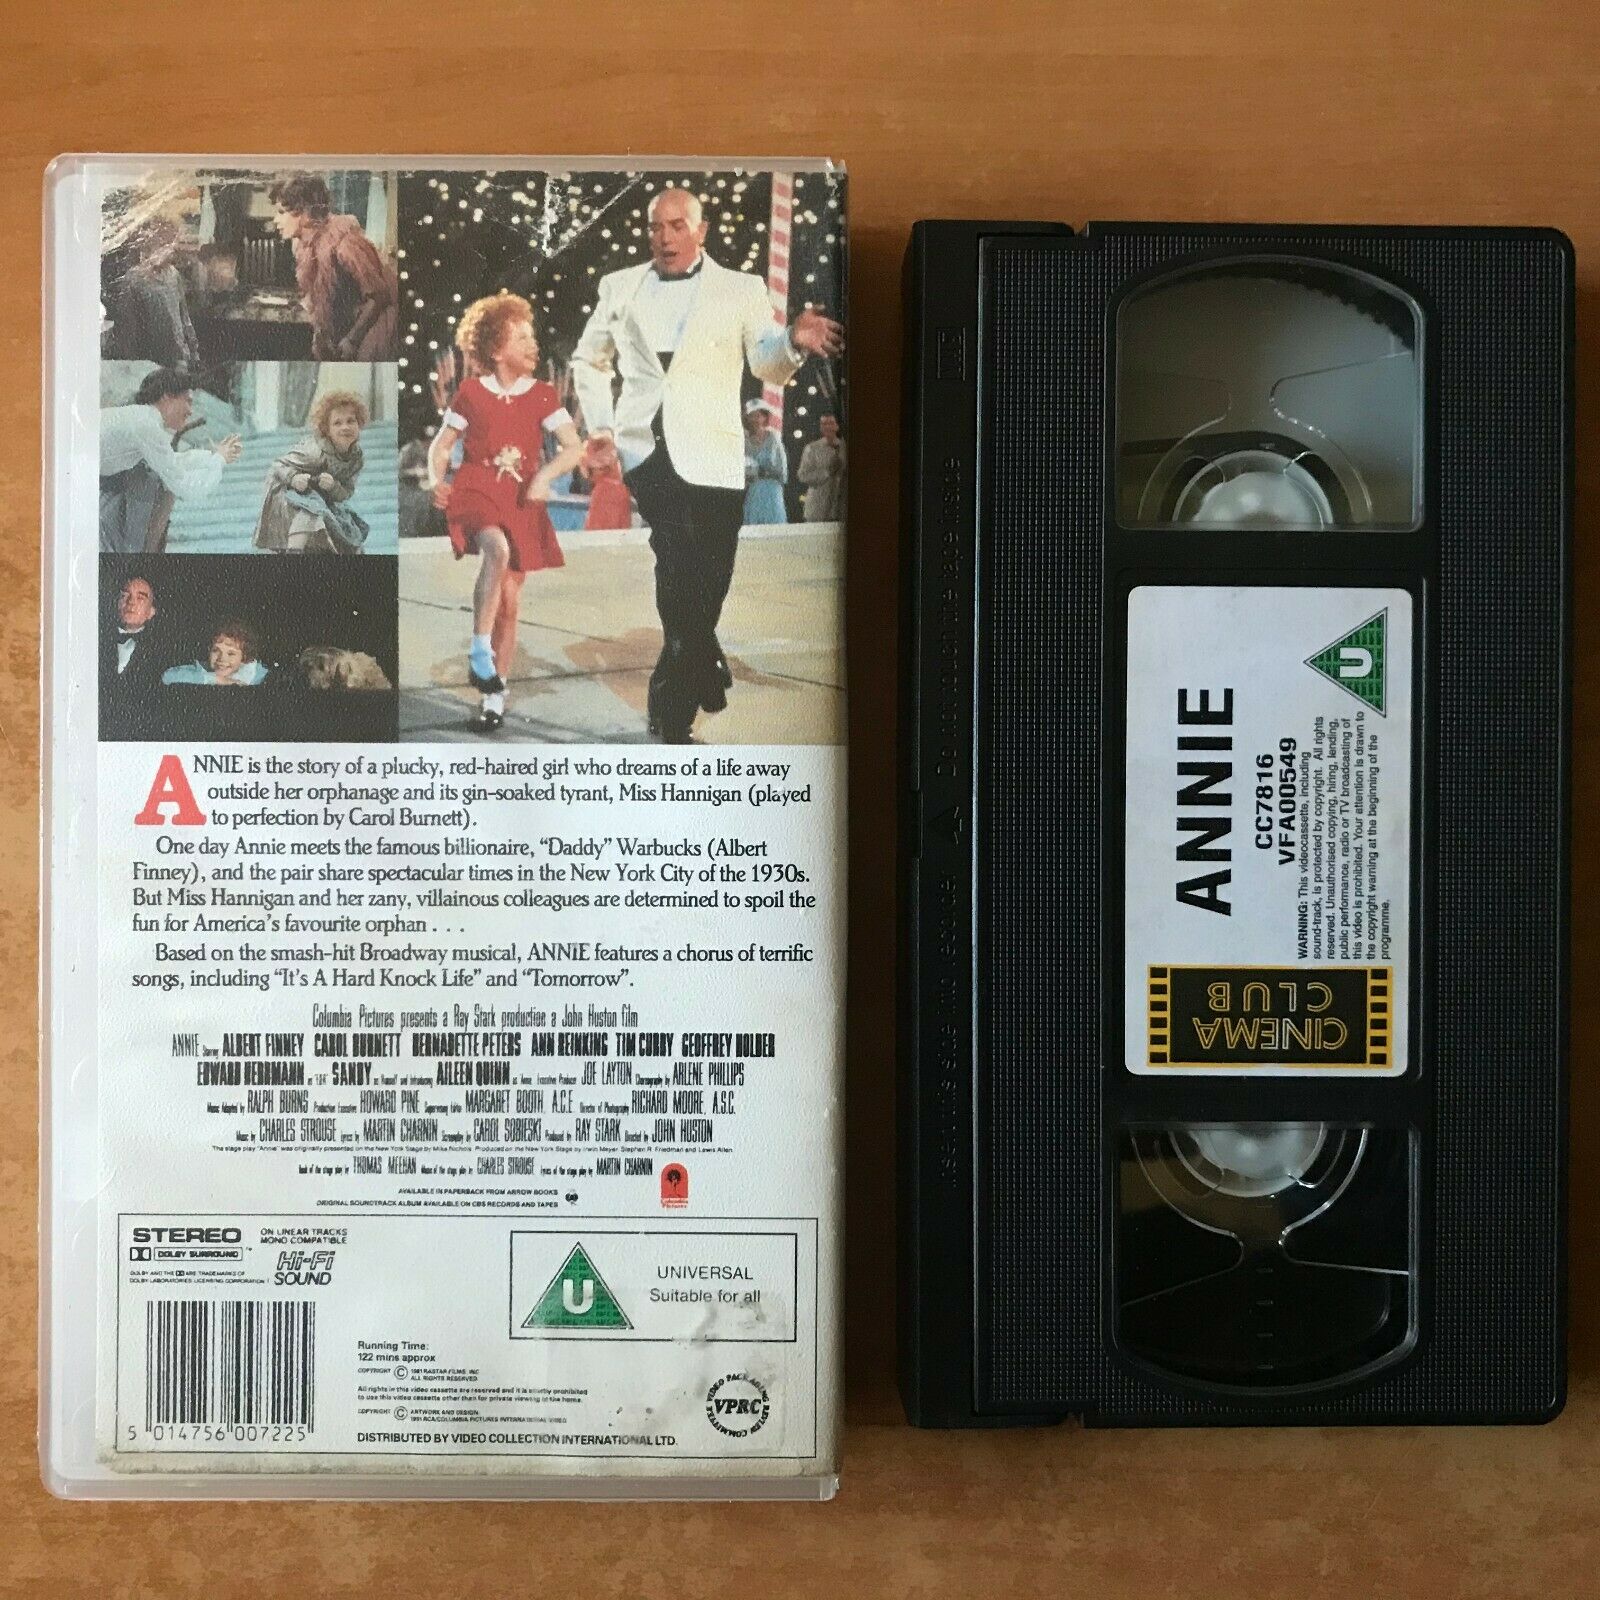 Annie (1982): The Movie Of 'Tomorrow' - Musical - Tim Curry - Children's - VHS-